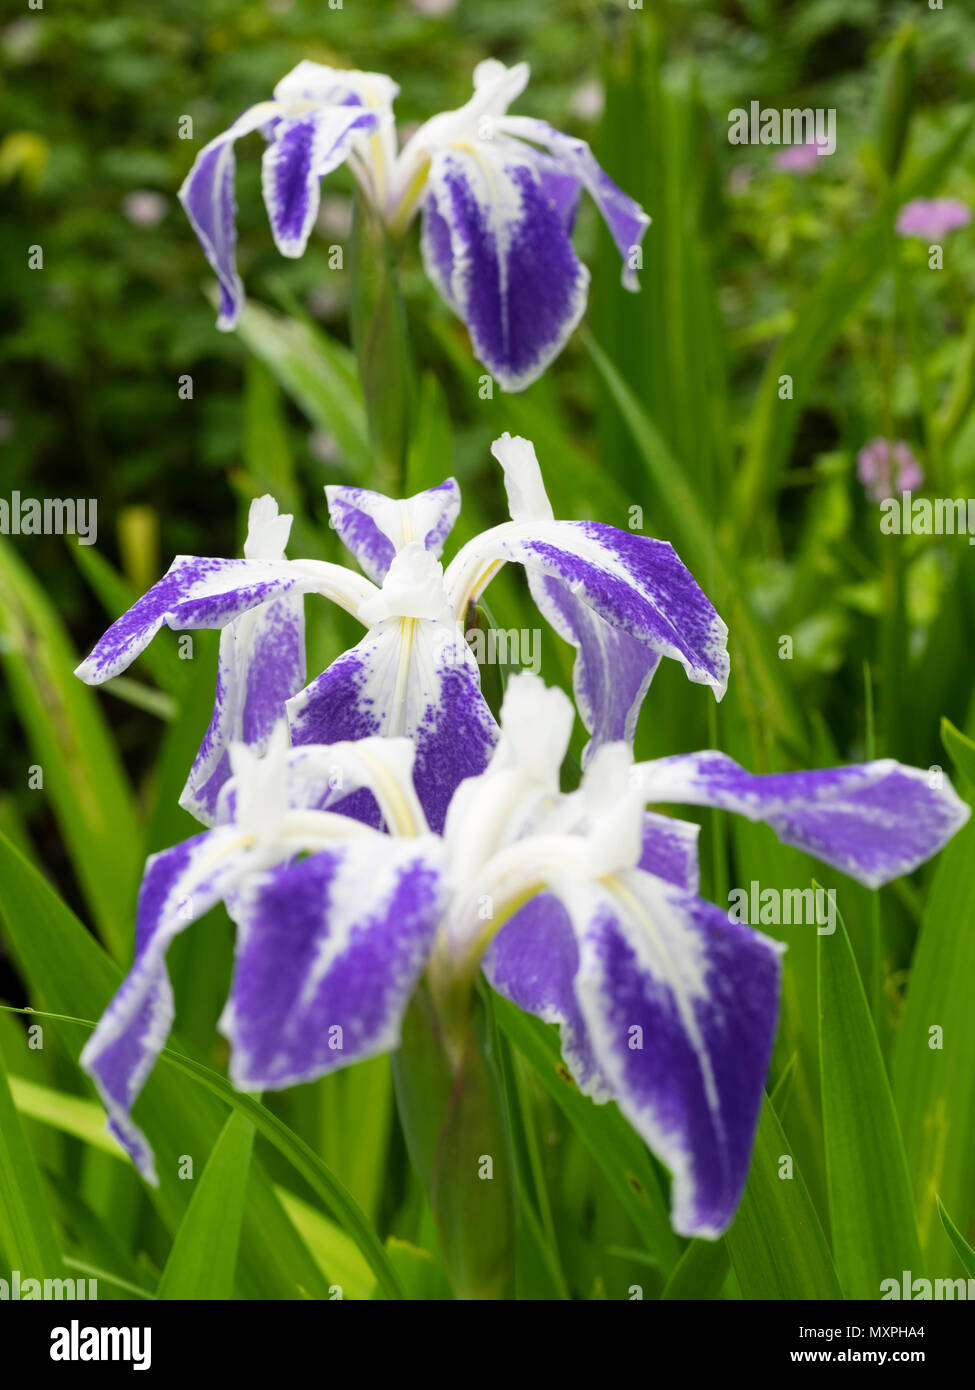 White and blue marked early summer flowers of the marginal aquatic water iris, Iris laevigata 'Colchesterensis' Stock Photo